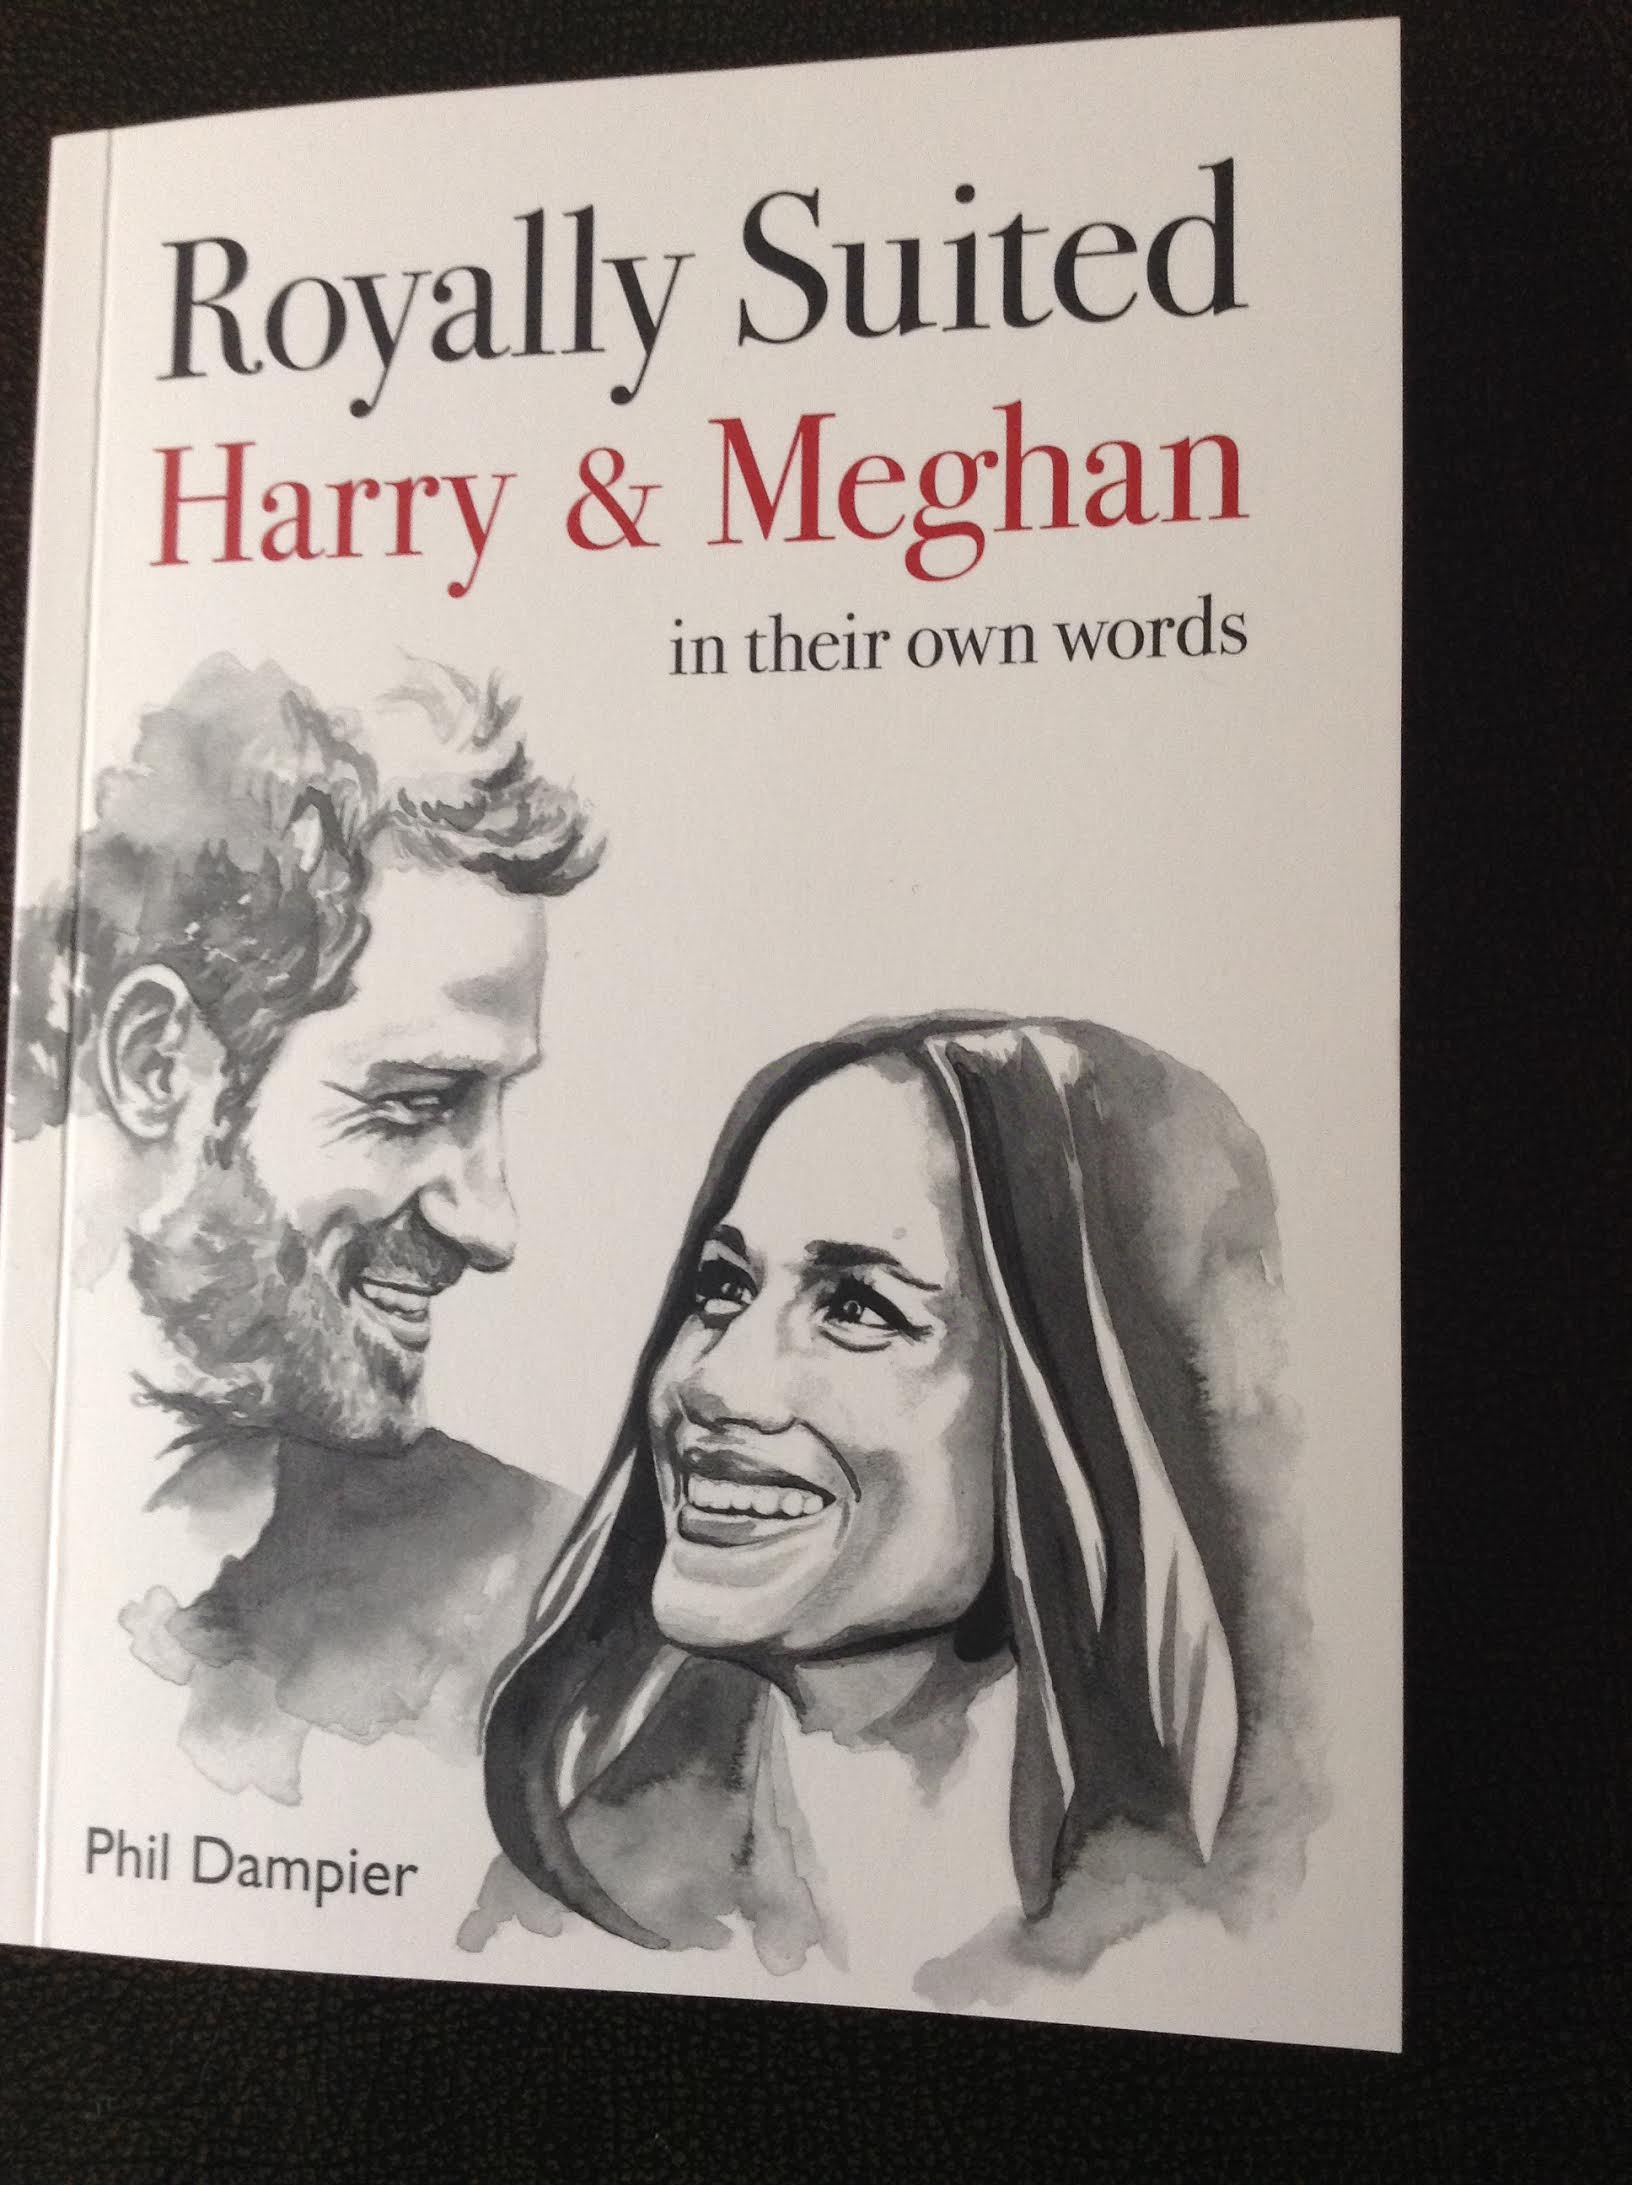 Royally Suited book about Harry meeting Meghan